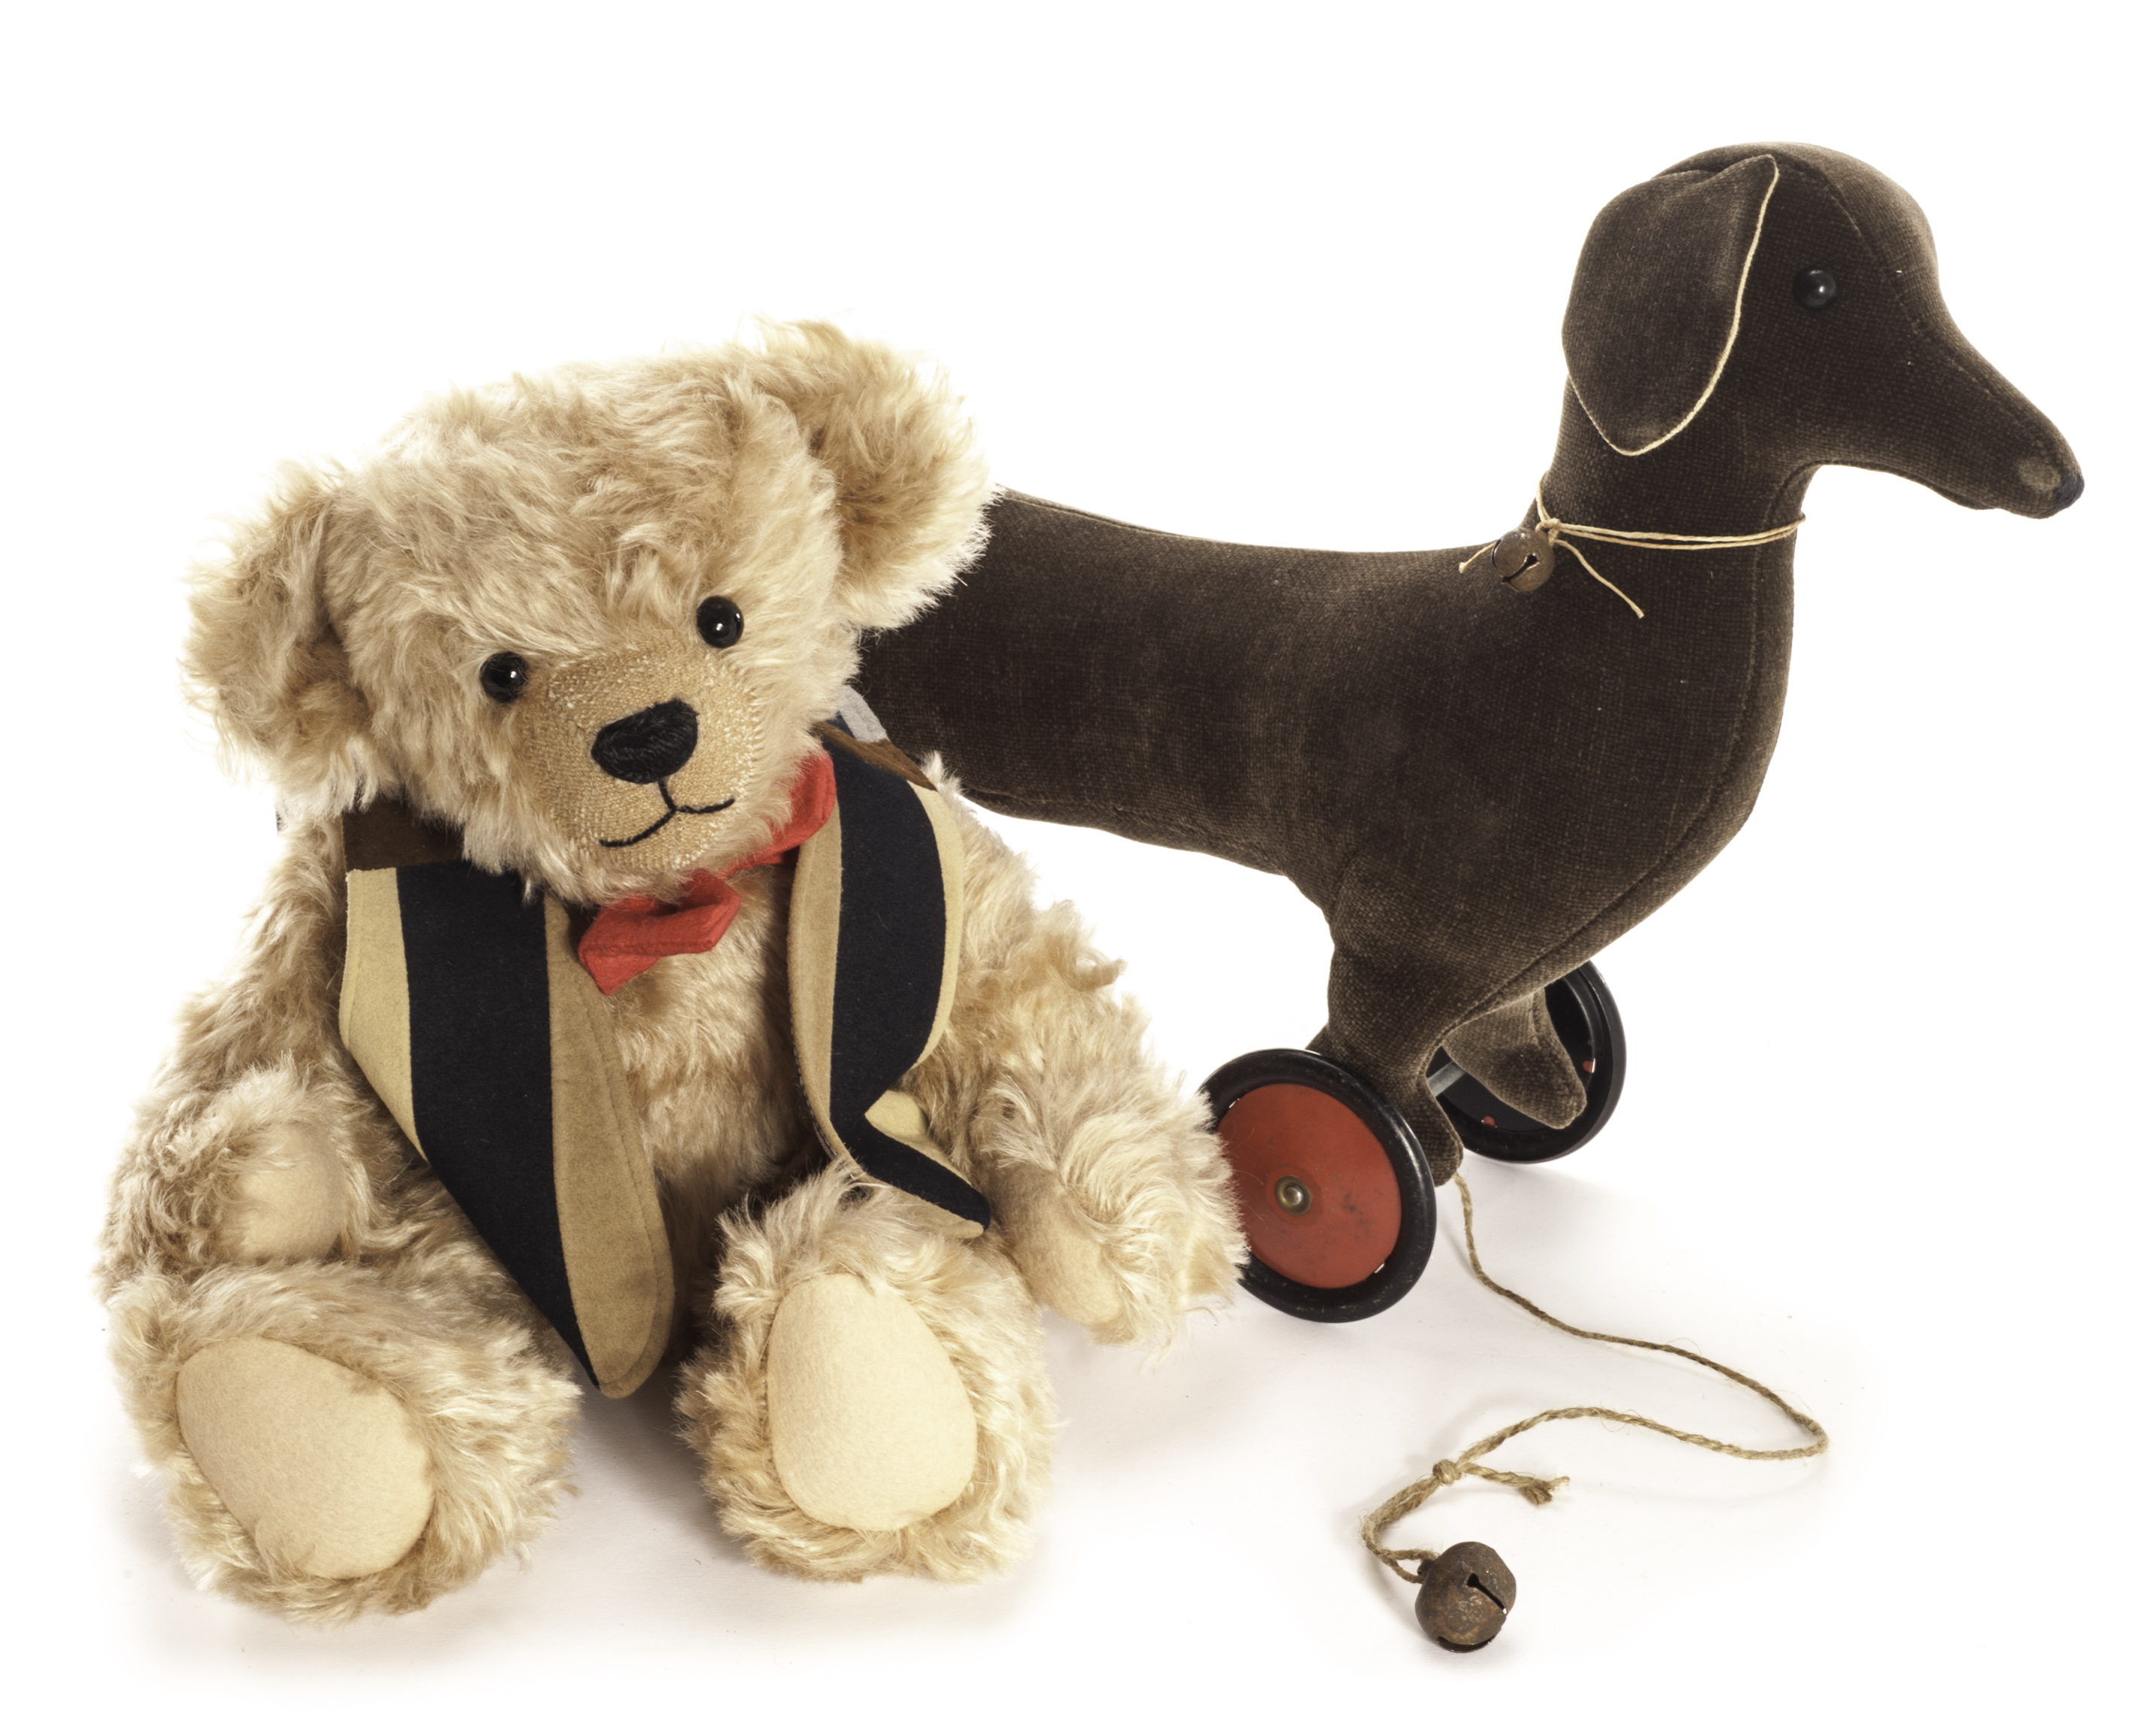 A Larious Bears by Cathy, (Canada) in suede waist coat - 13in. (33cm.) high and a Northfield